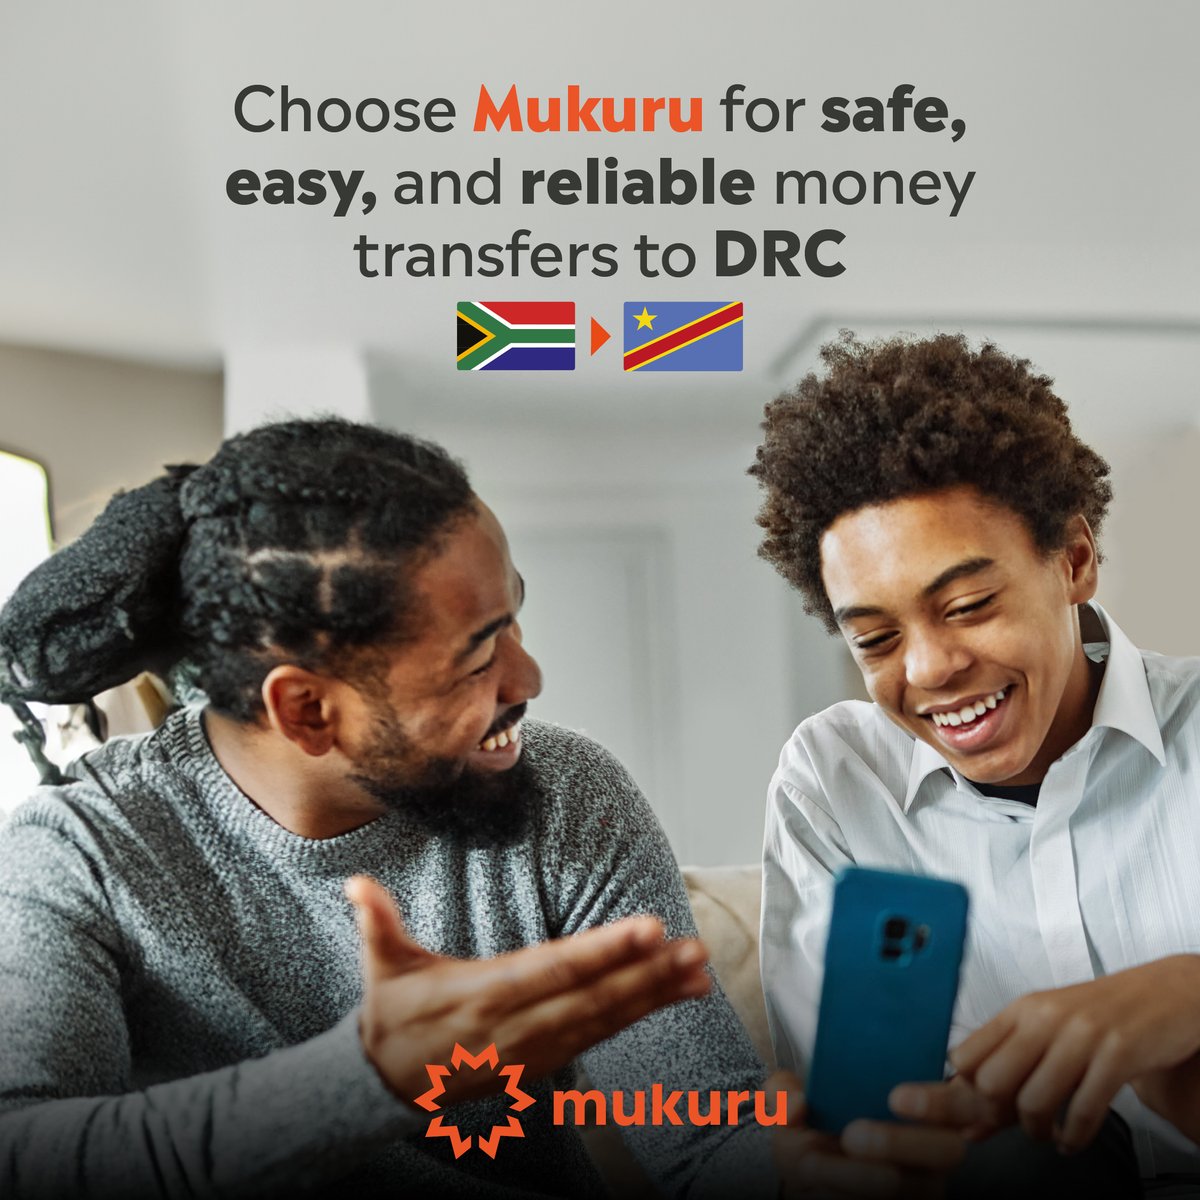 Don't compromise – trust Mukuru to ensure your hard-earned money reaches your loved ones in DRC quickly and securely. ➡️WhatsApp “Hi” to +2786 001 8555 and start sending with confidence today!